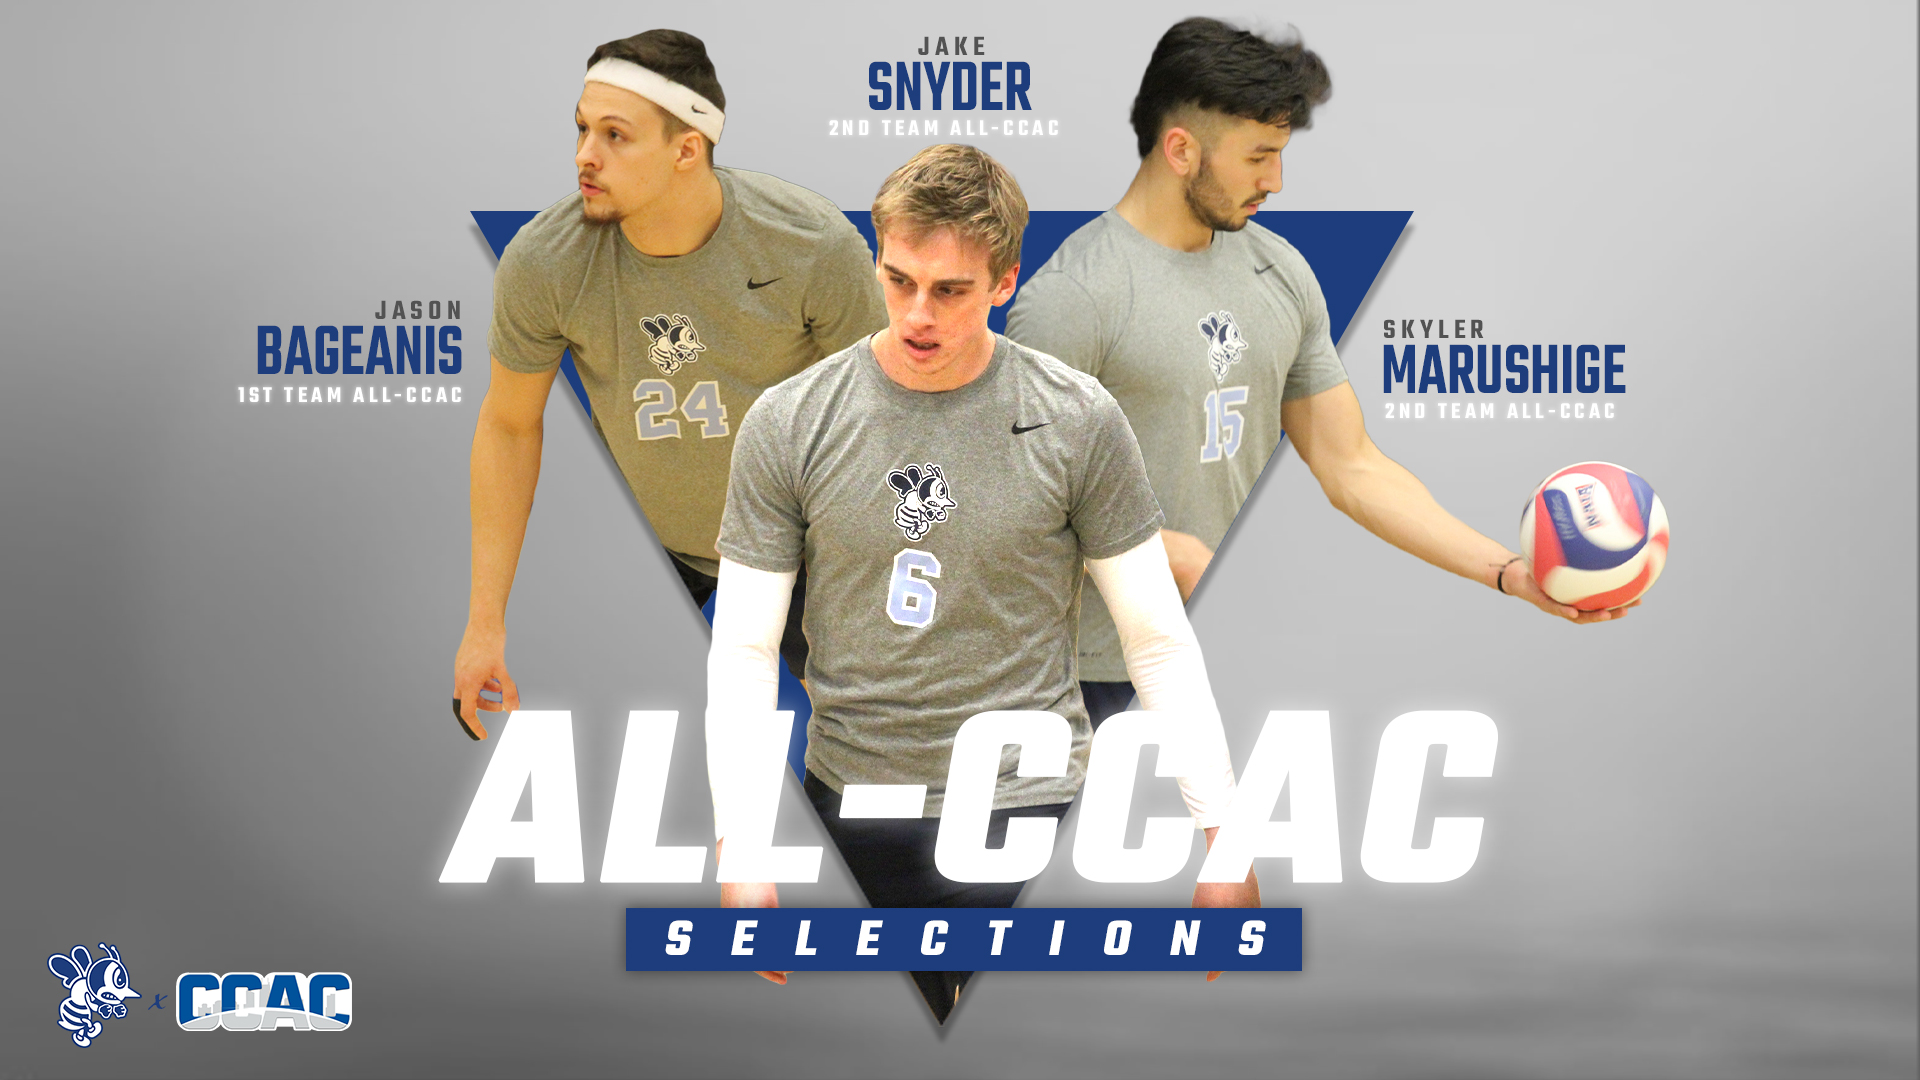 Bageanis named first team all-CCAC, Marushige and Snyder on second team